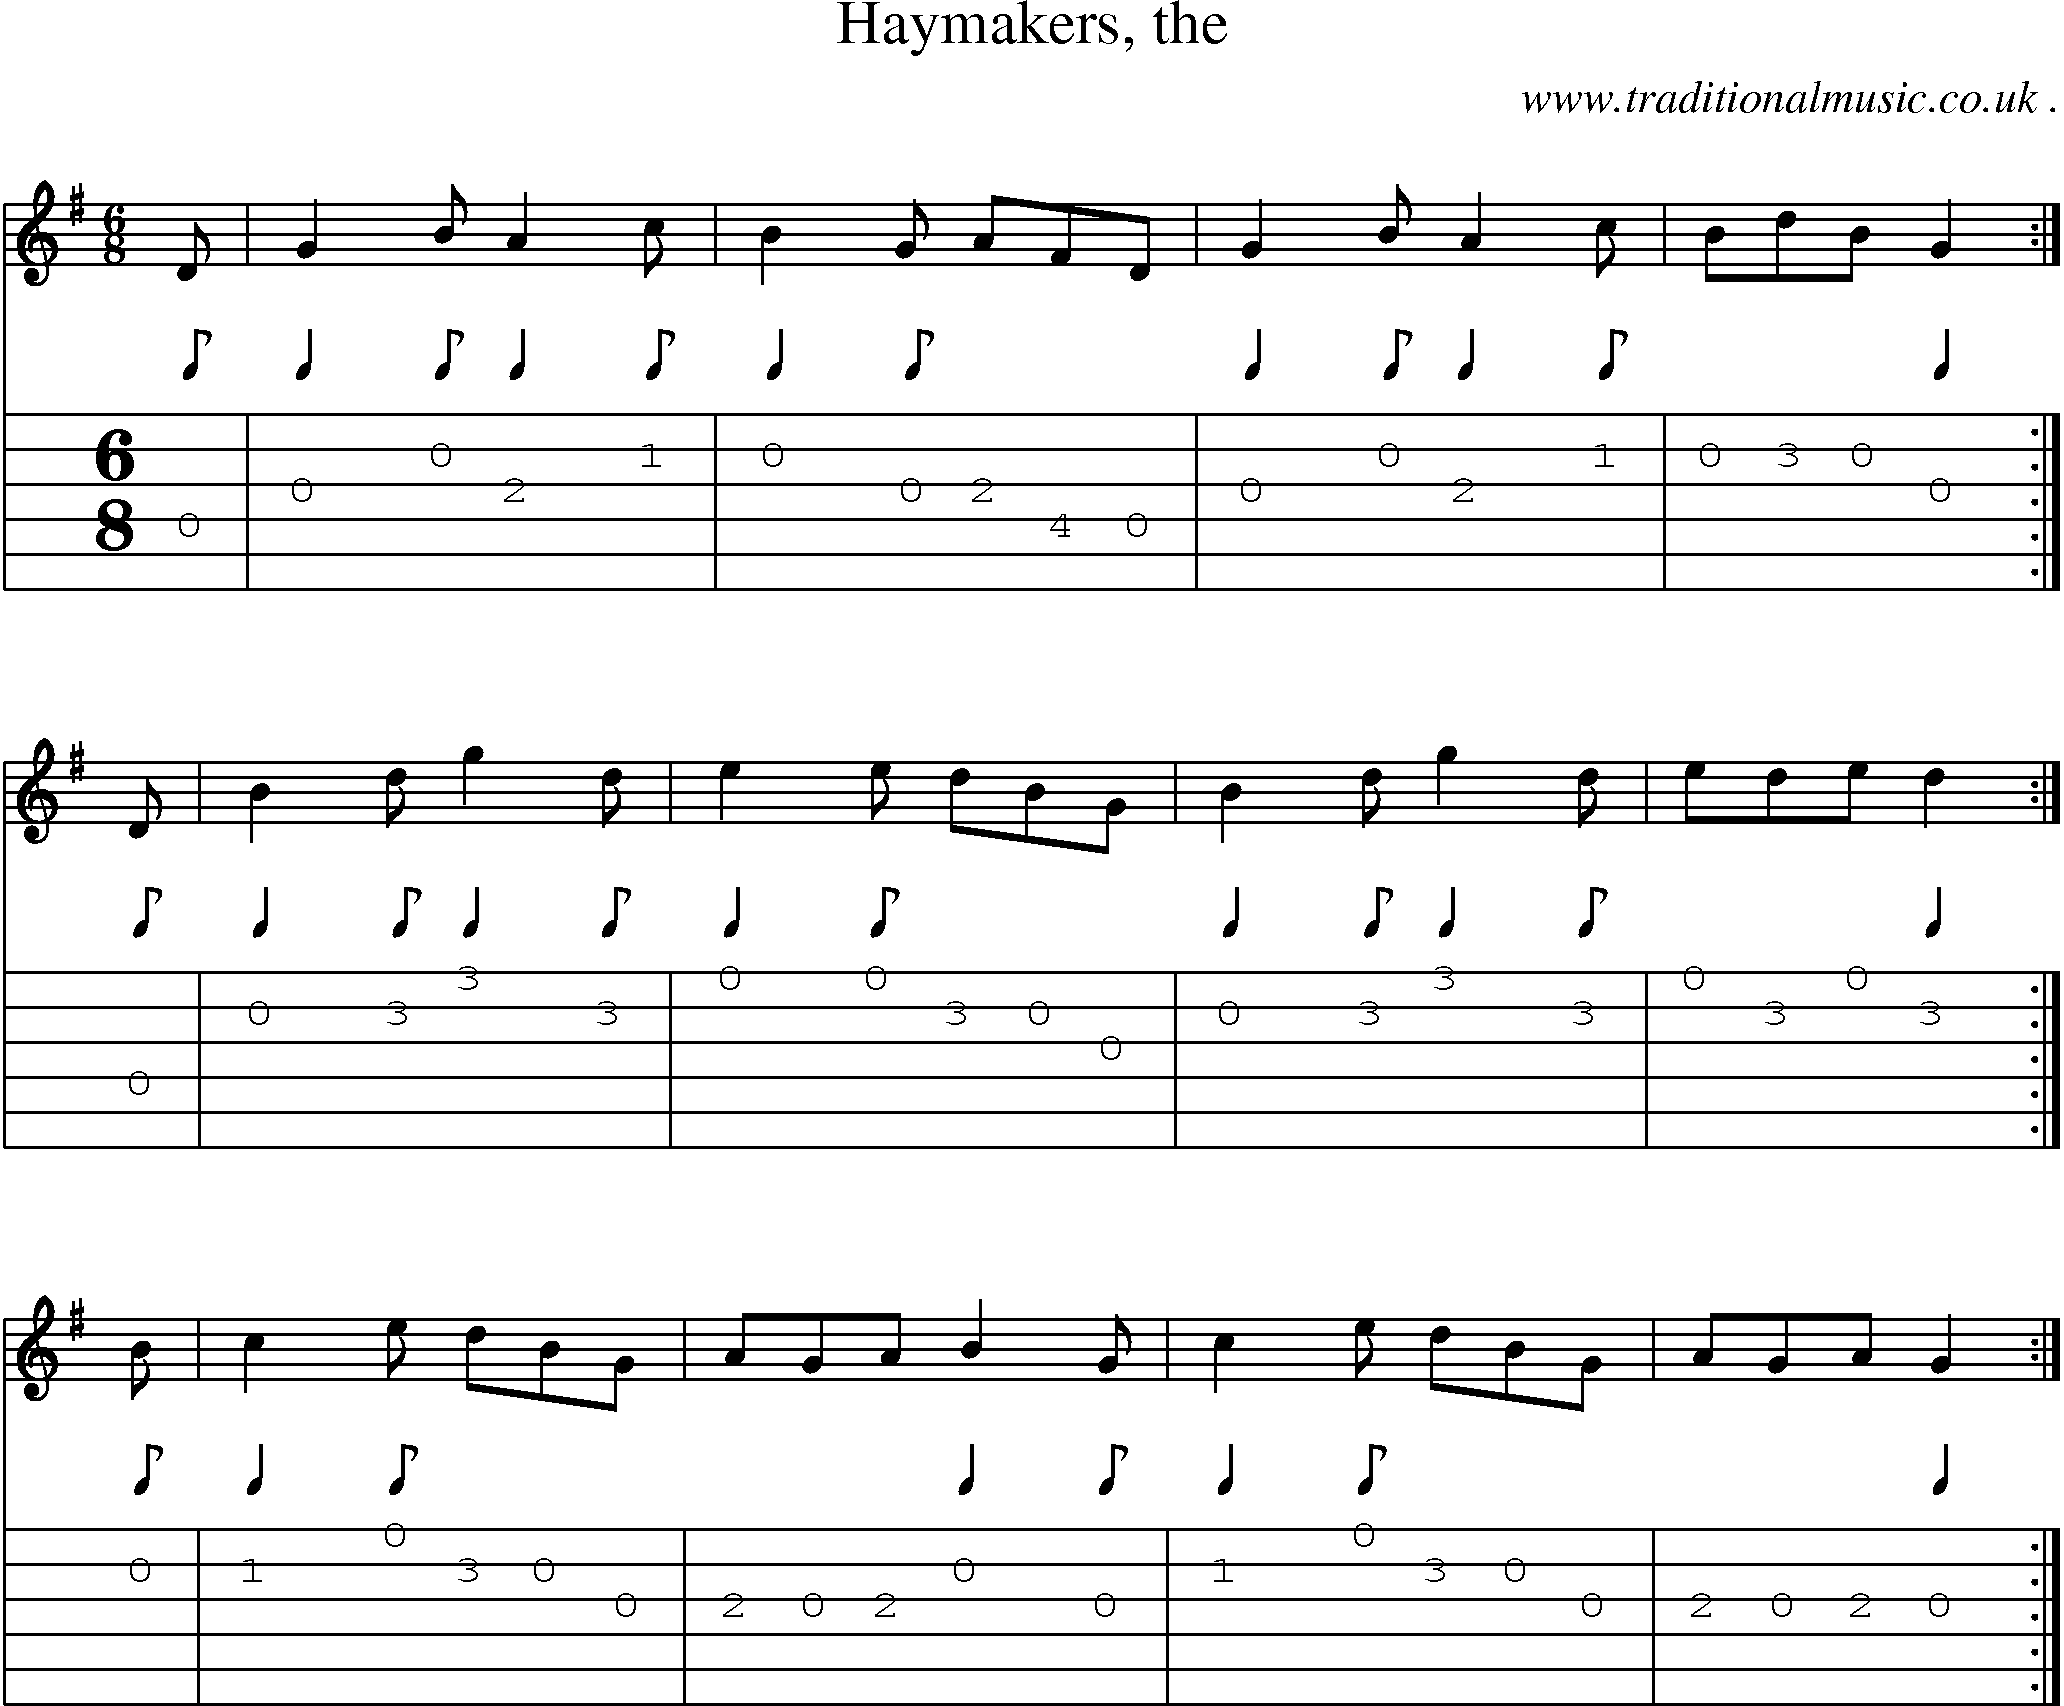 Sheet-music  score, Chords and Guitar Tabs for Haymakers The